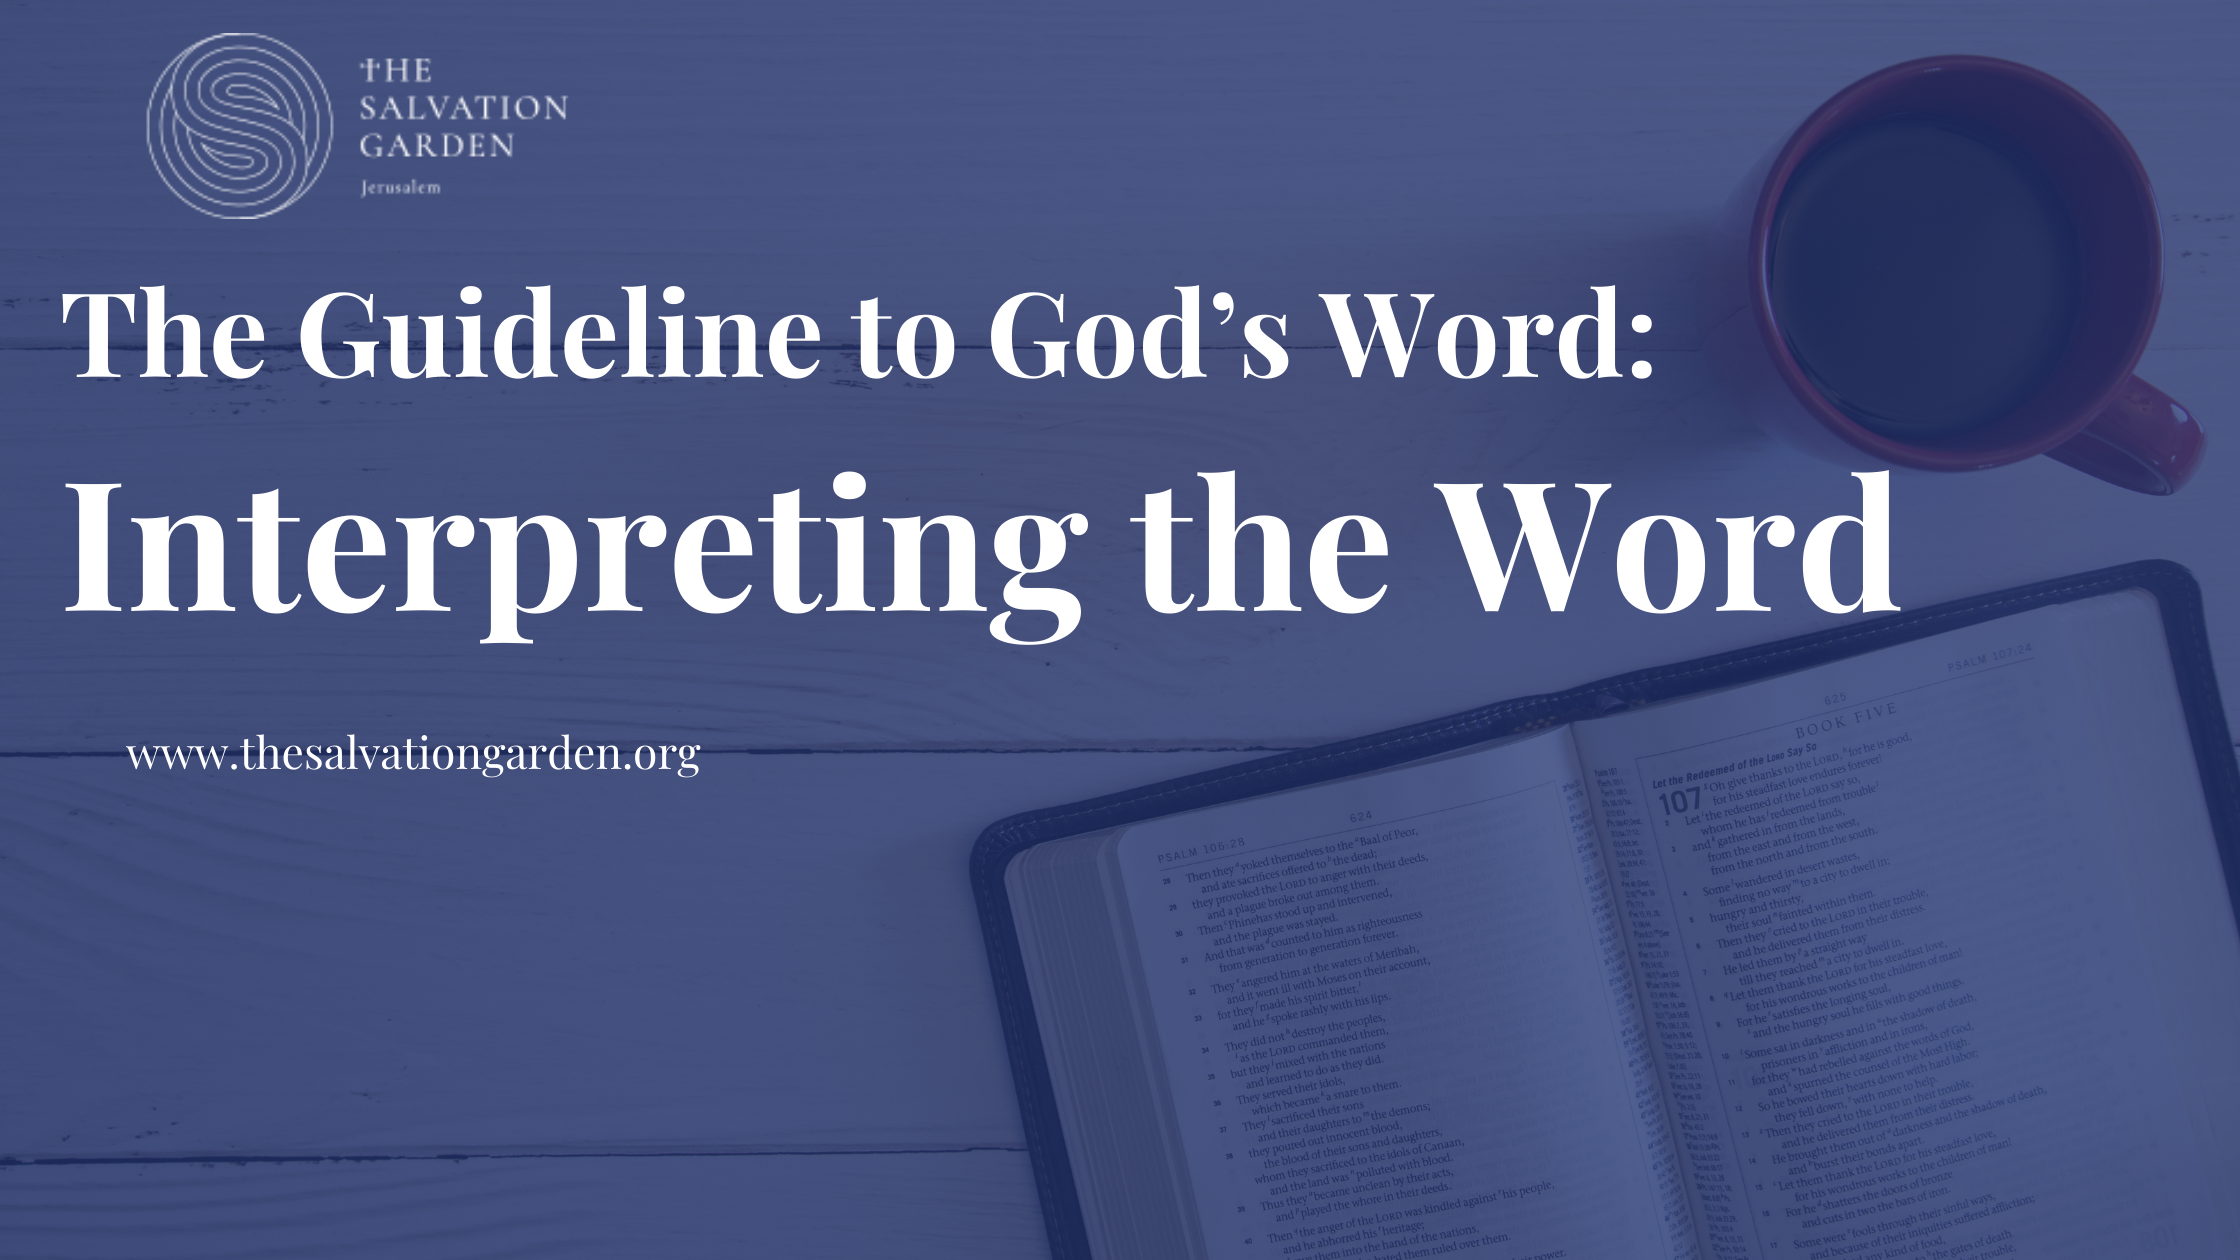 The Guideline to God’s Word: Interpreting the Word